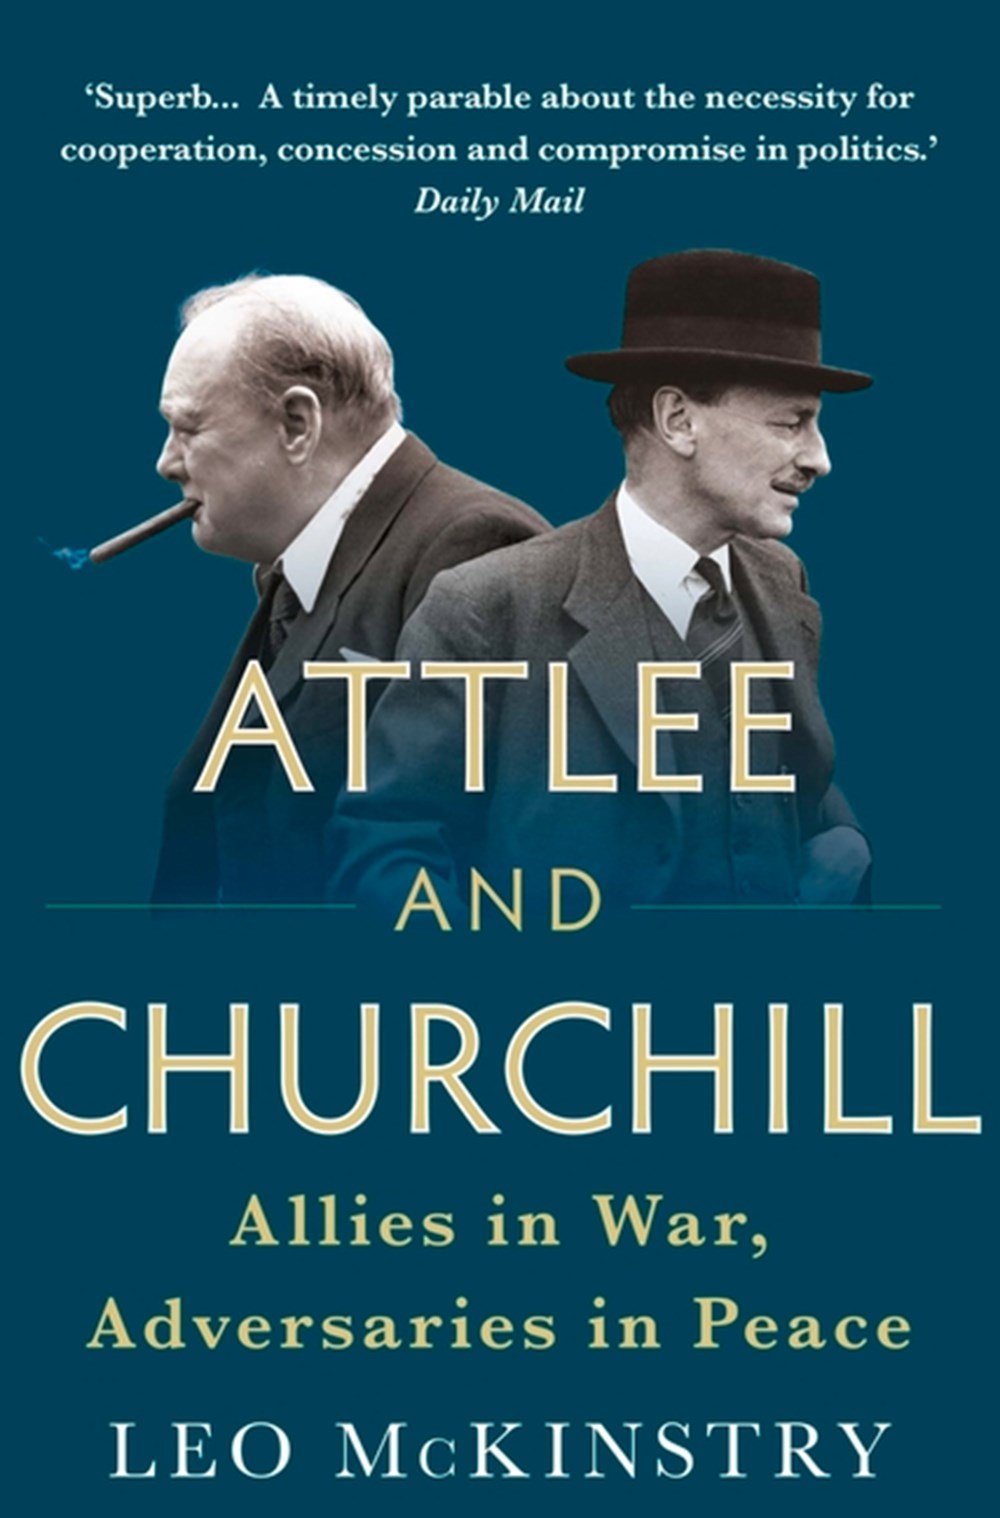 Attlee and Churchill Allies in War, Adversaries in Peace